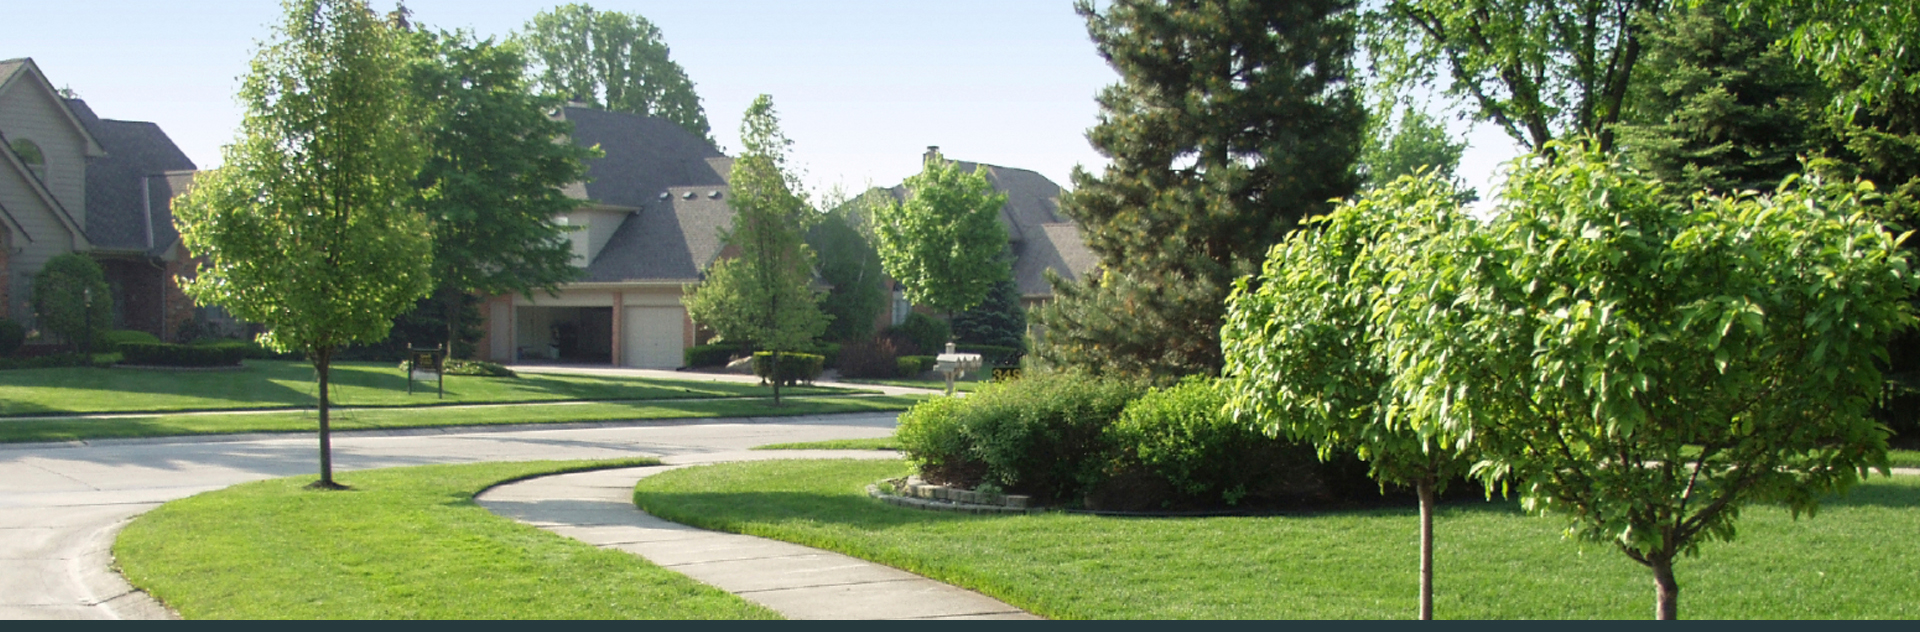 Street View of Home that Has Easement Rights on Title Insurance at Hillsboro Title Company